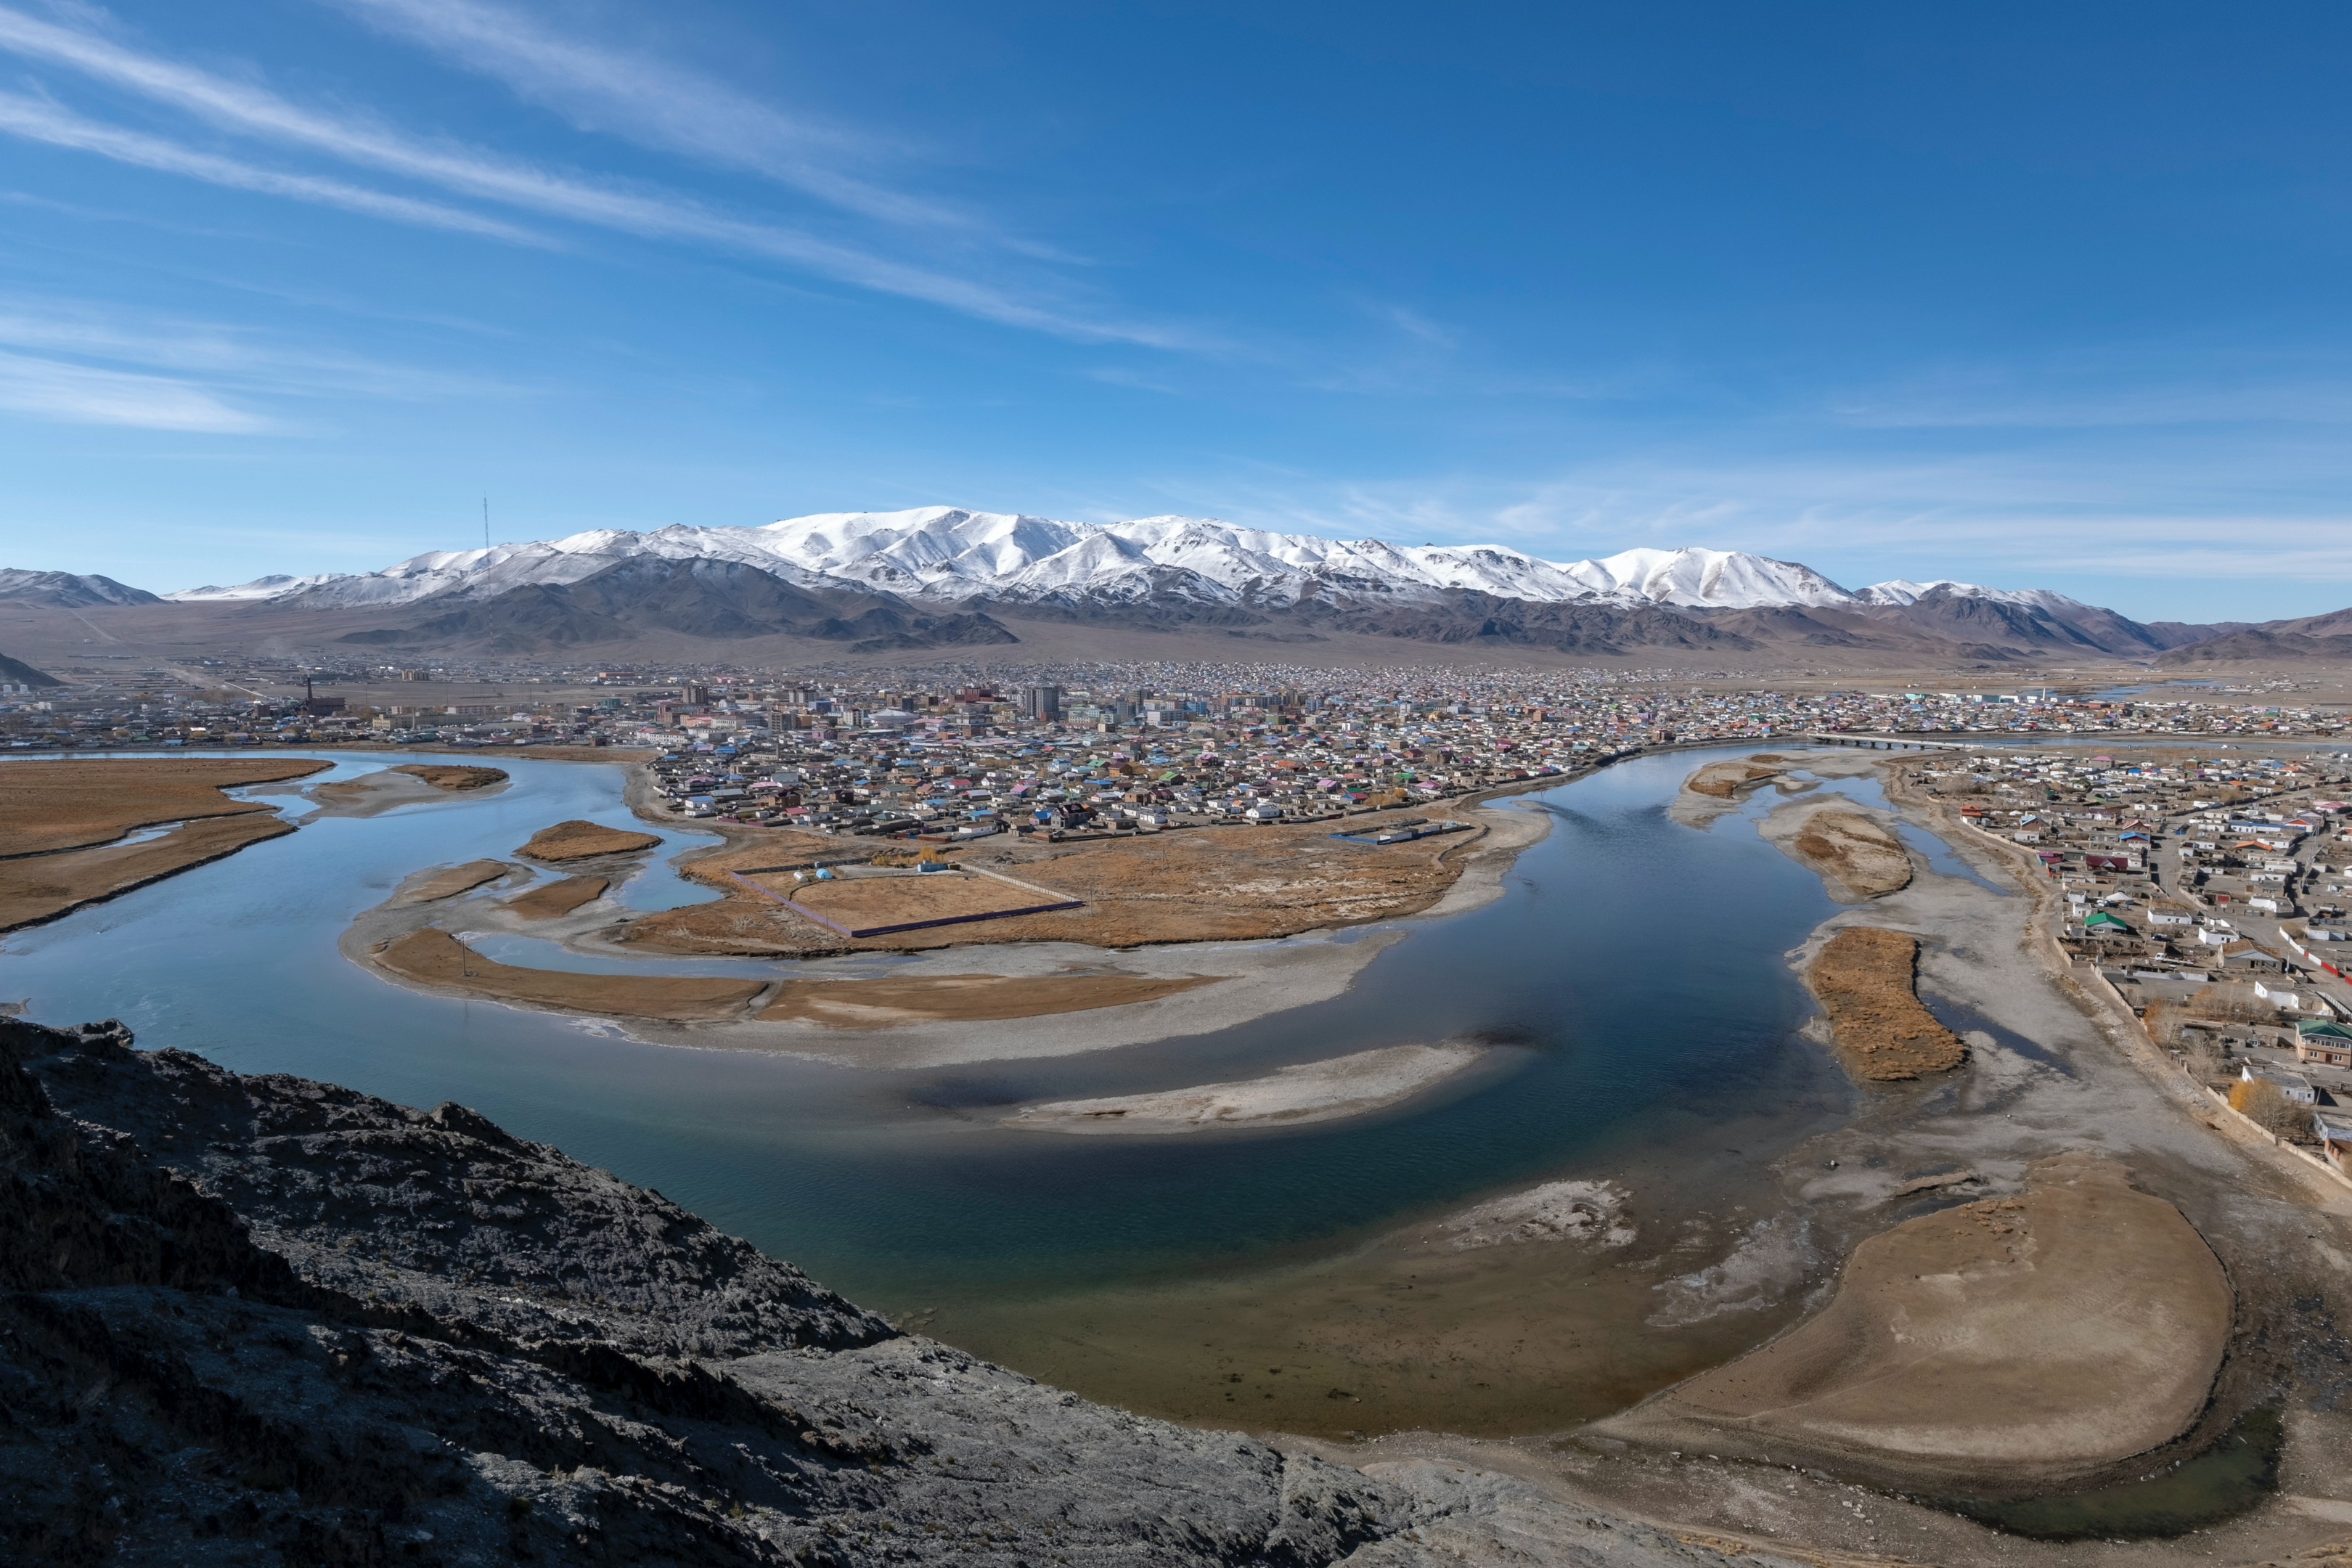 A view of Bayan-Ulgii province in western Mongolia